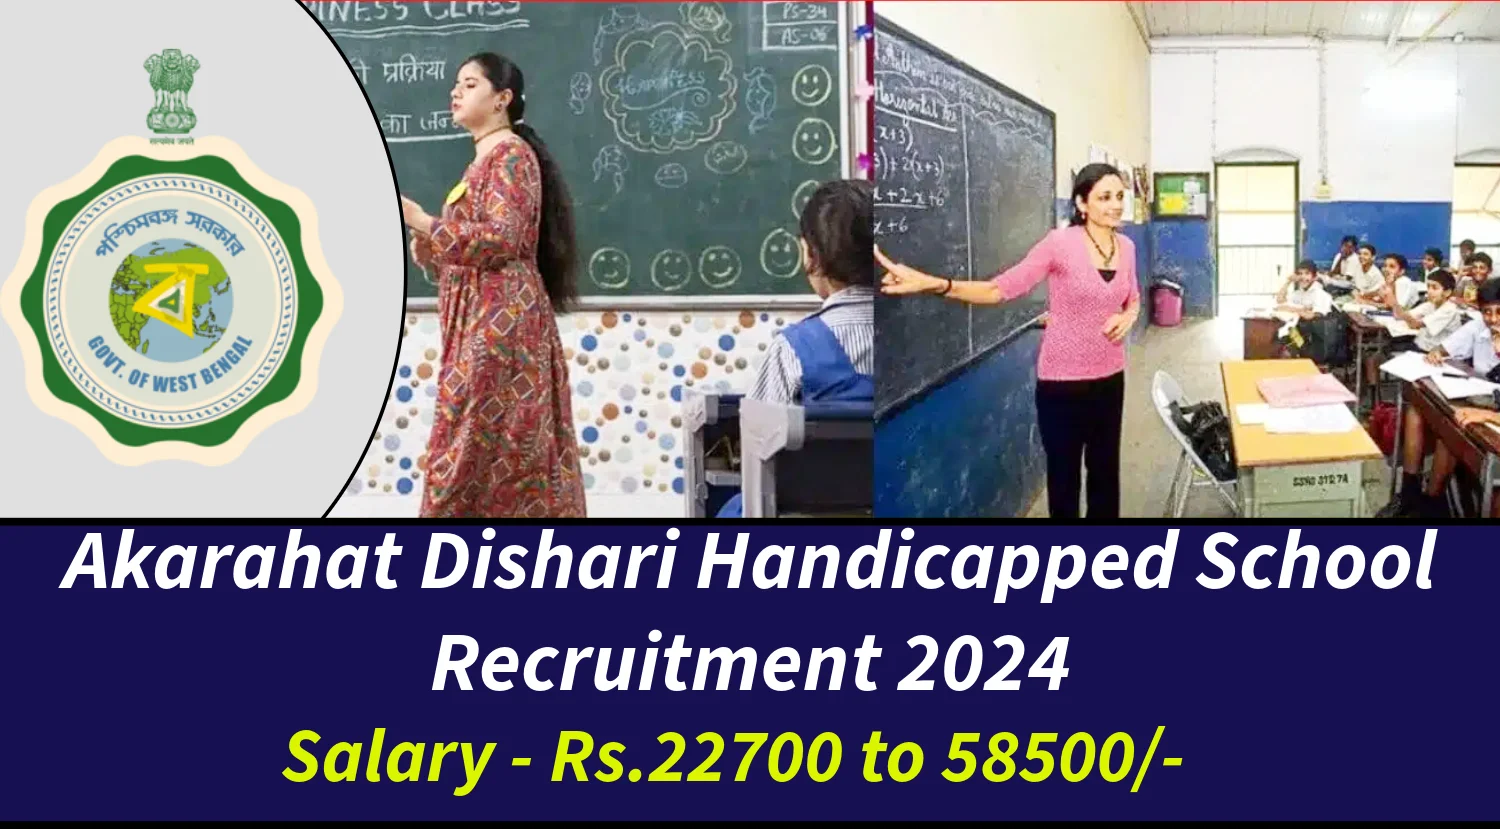 Akarahat Dishari Handicapped School Recruitment 2024 for Teacher Posts, Check Eligibility and How to Apply